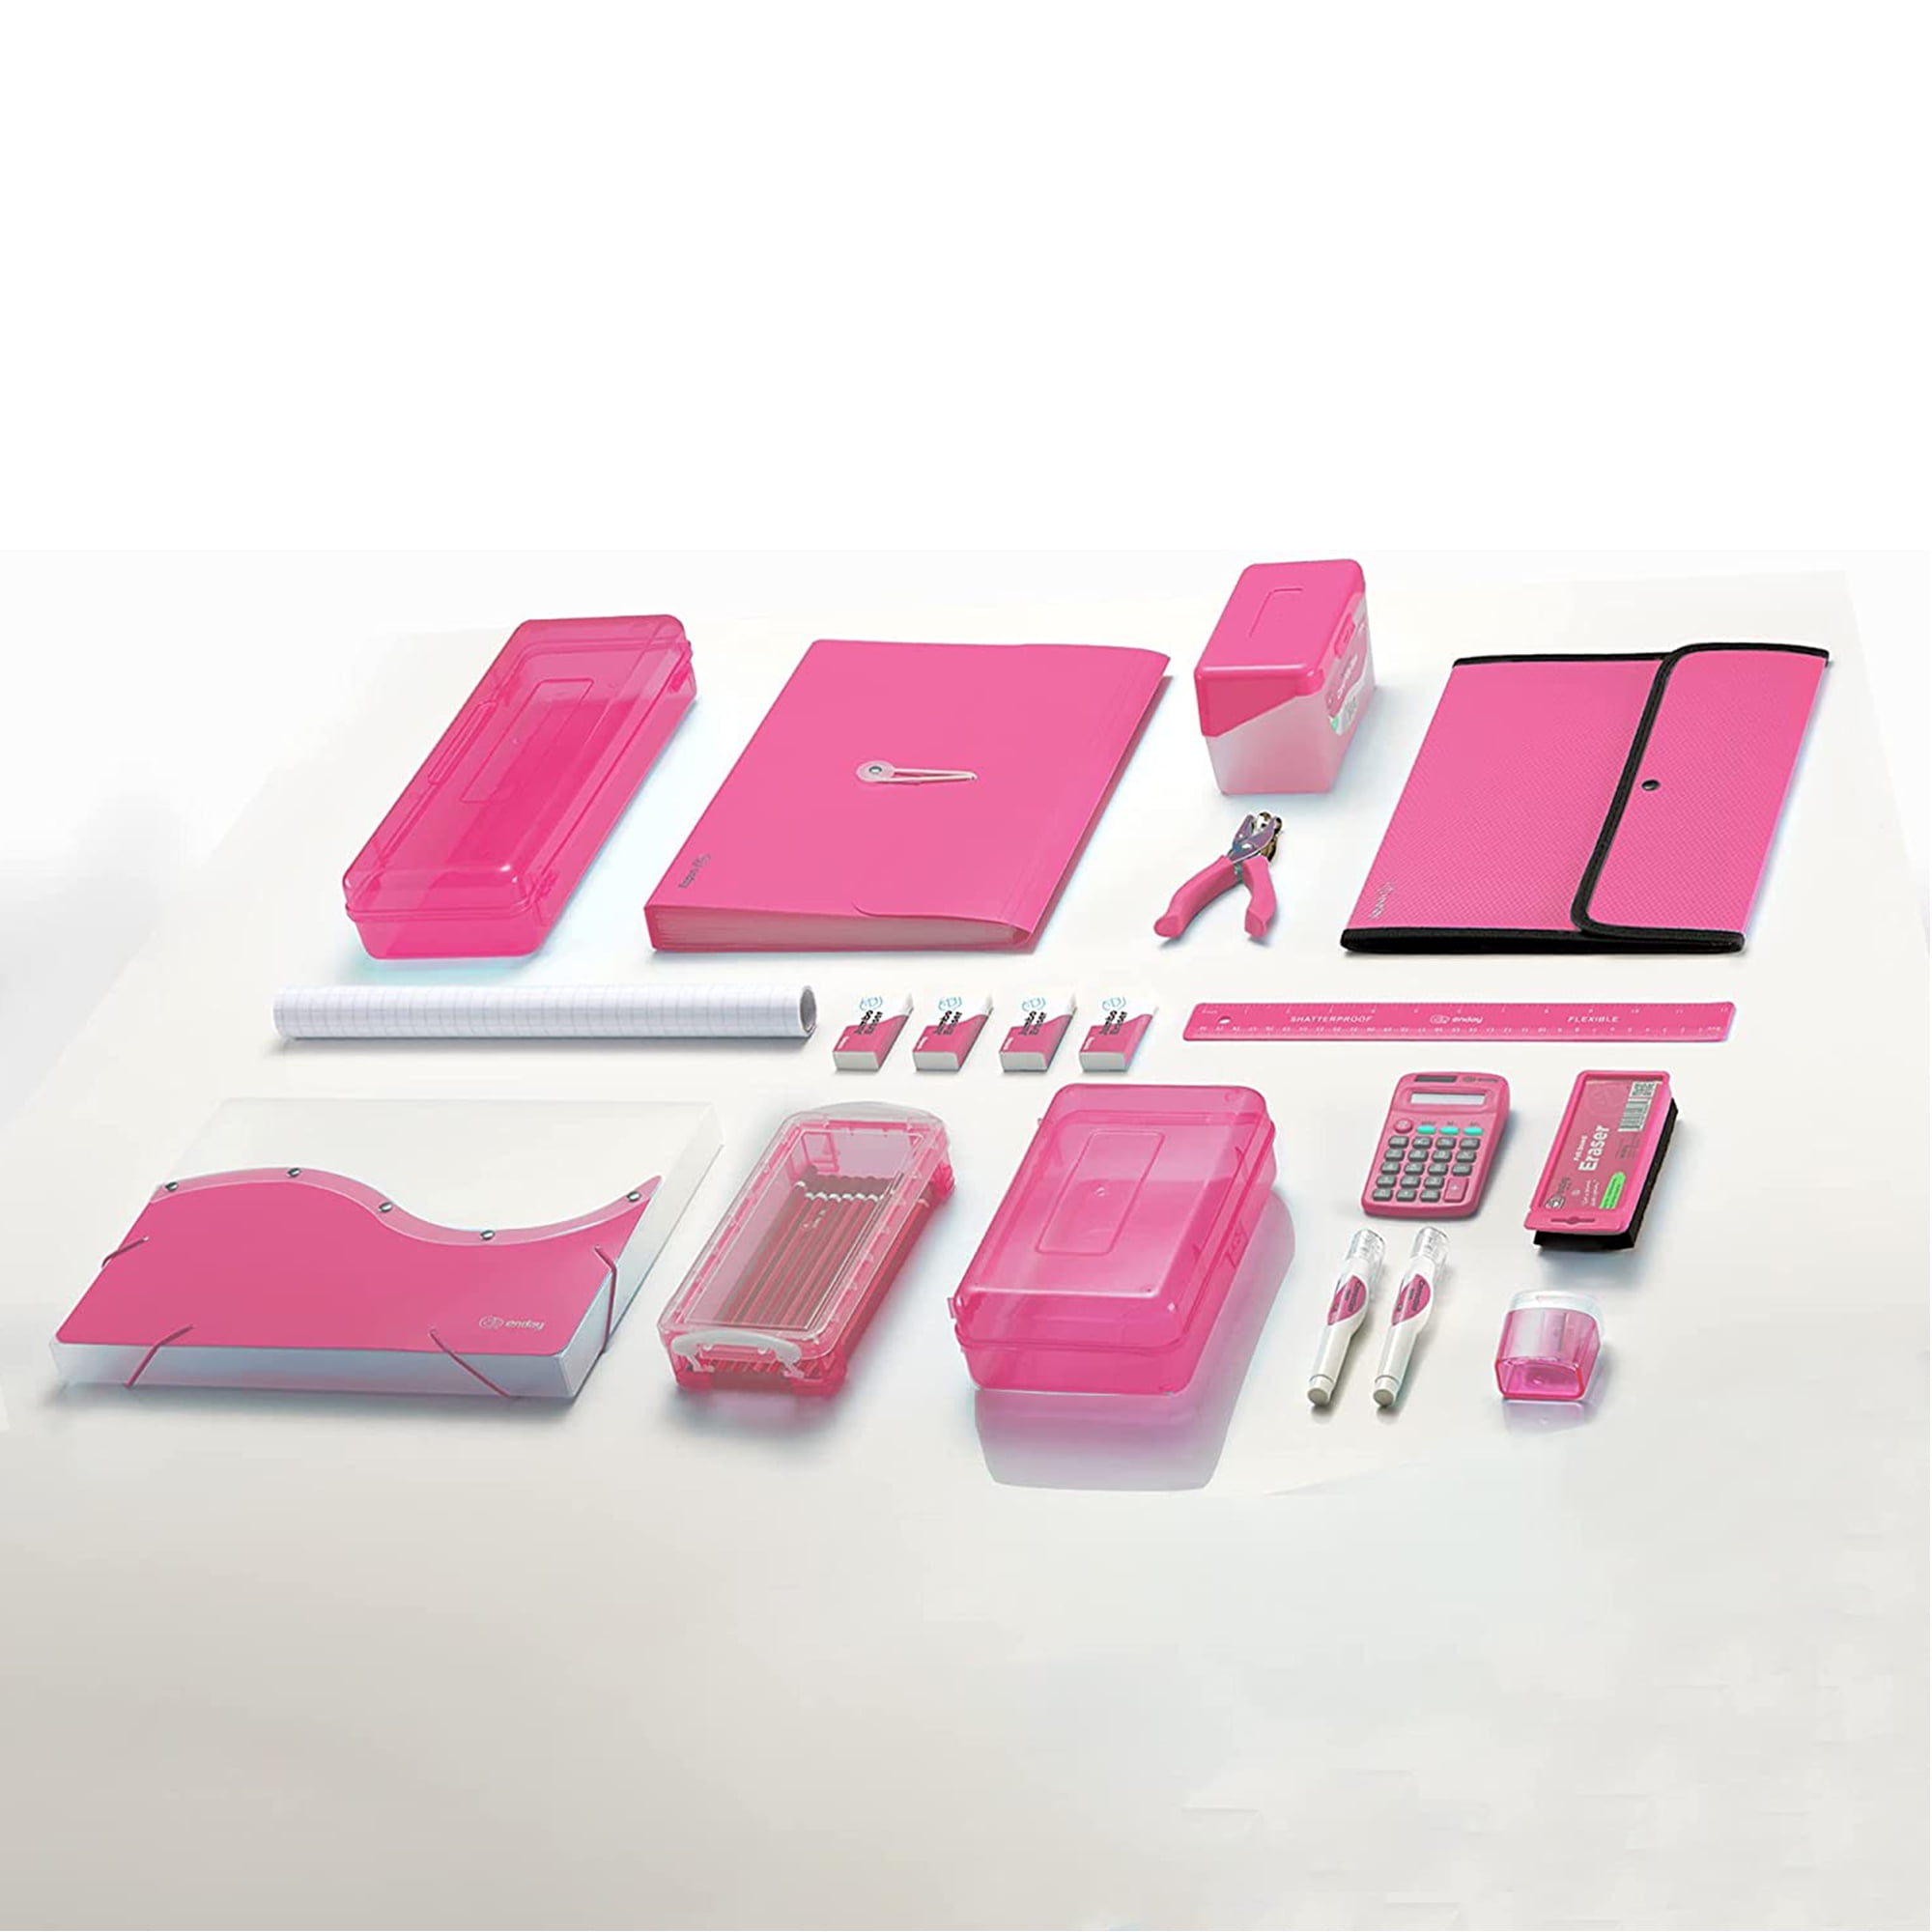 Mini Office Supply Kit AND Index Cards Set With Storage Cases Pink